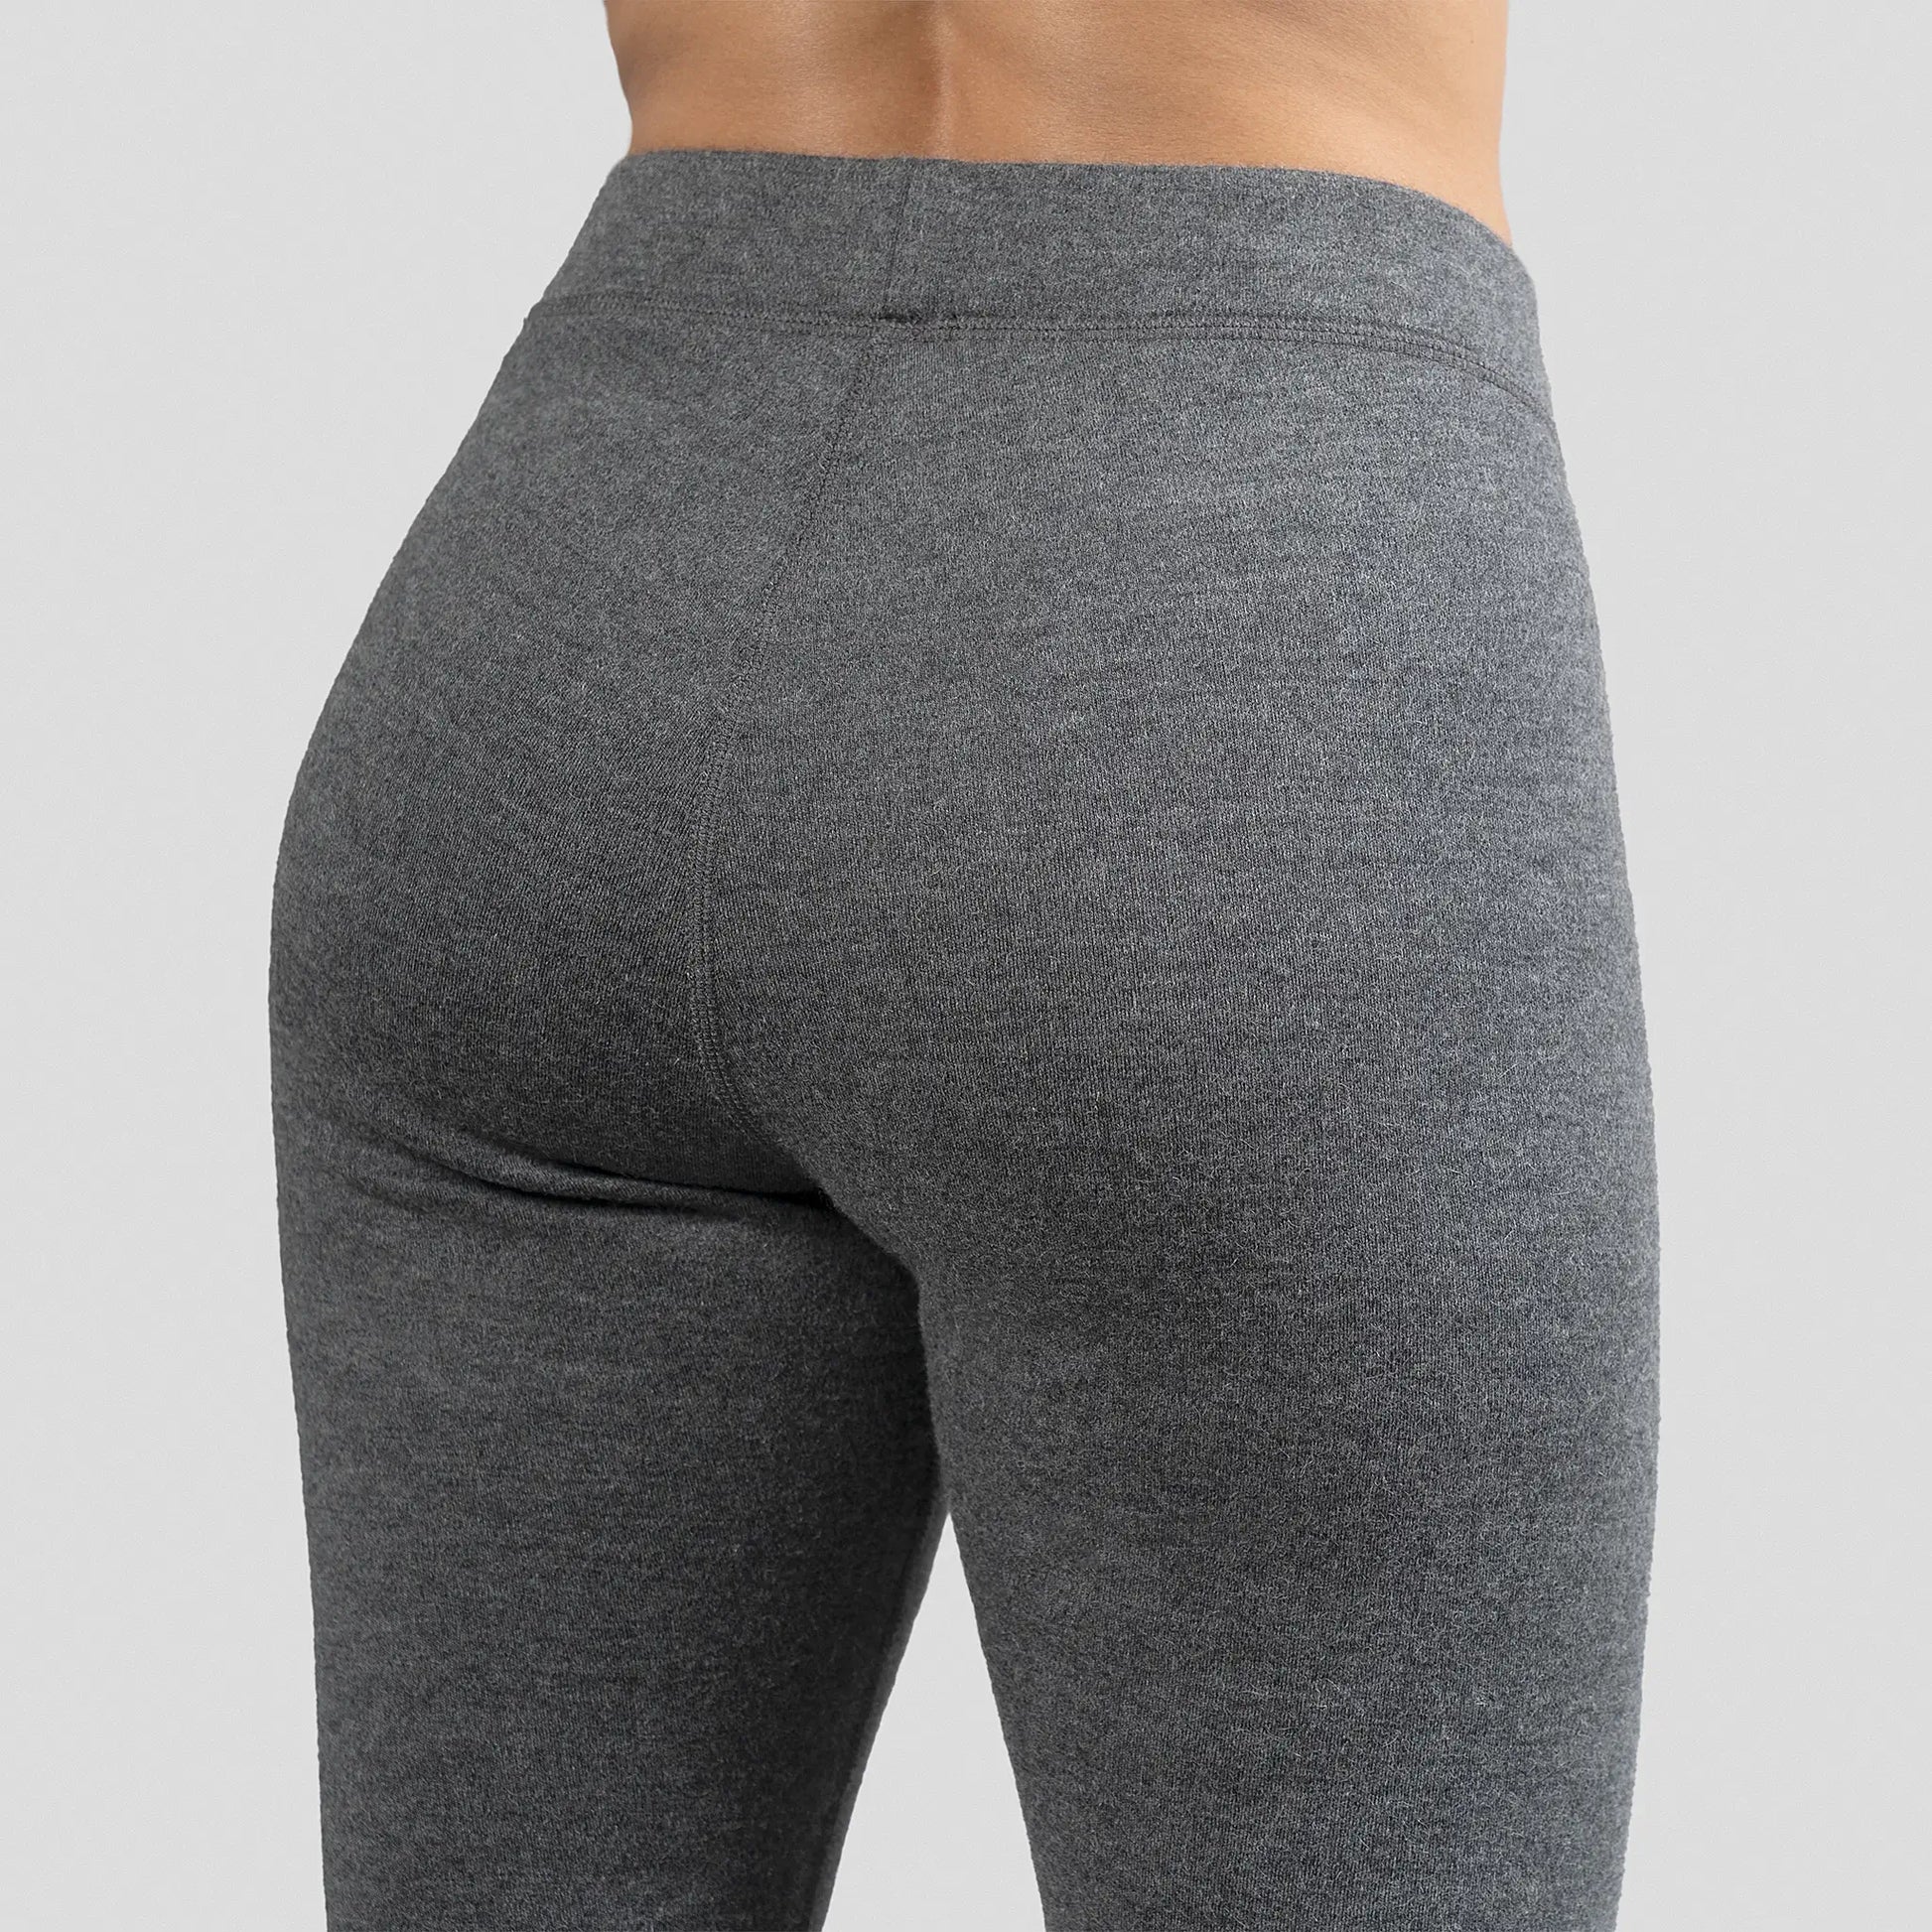 Premium Photo  A woman gets rid of lumps on woolen leggings, care for  leggings